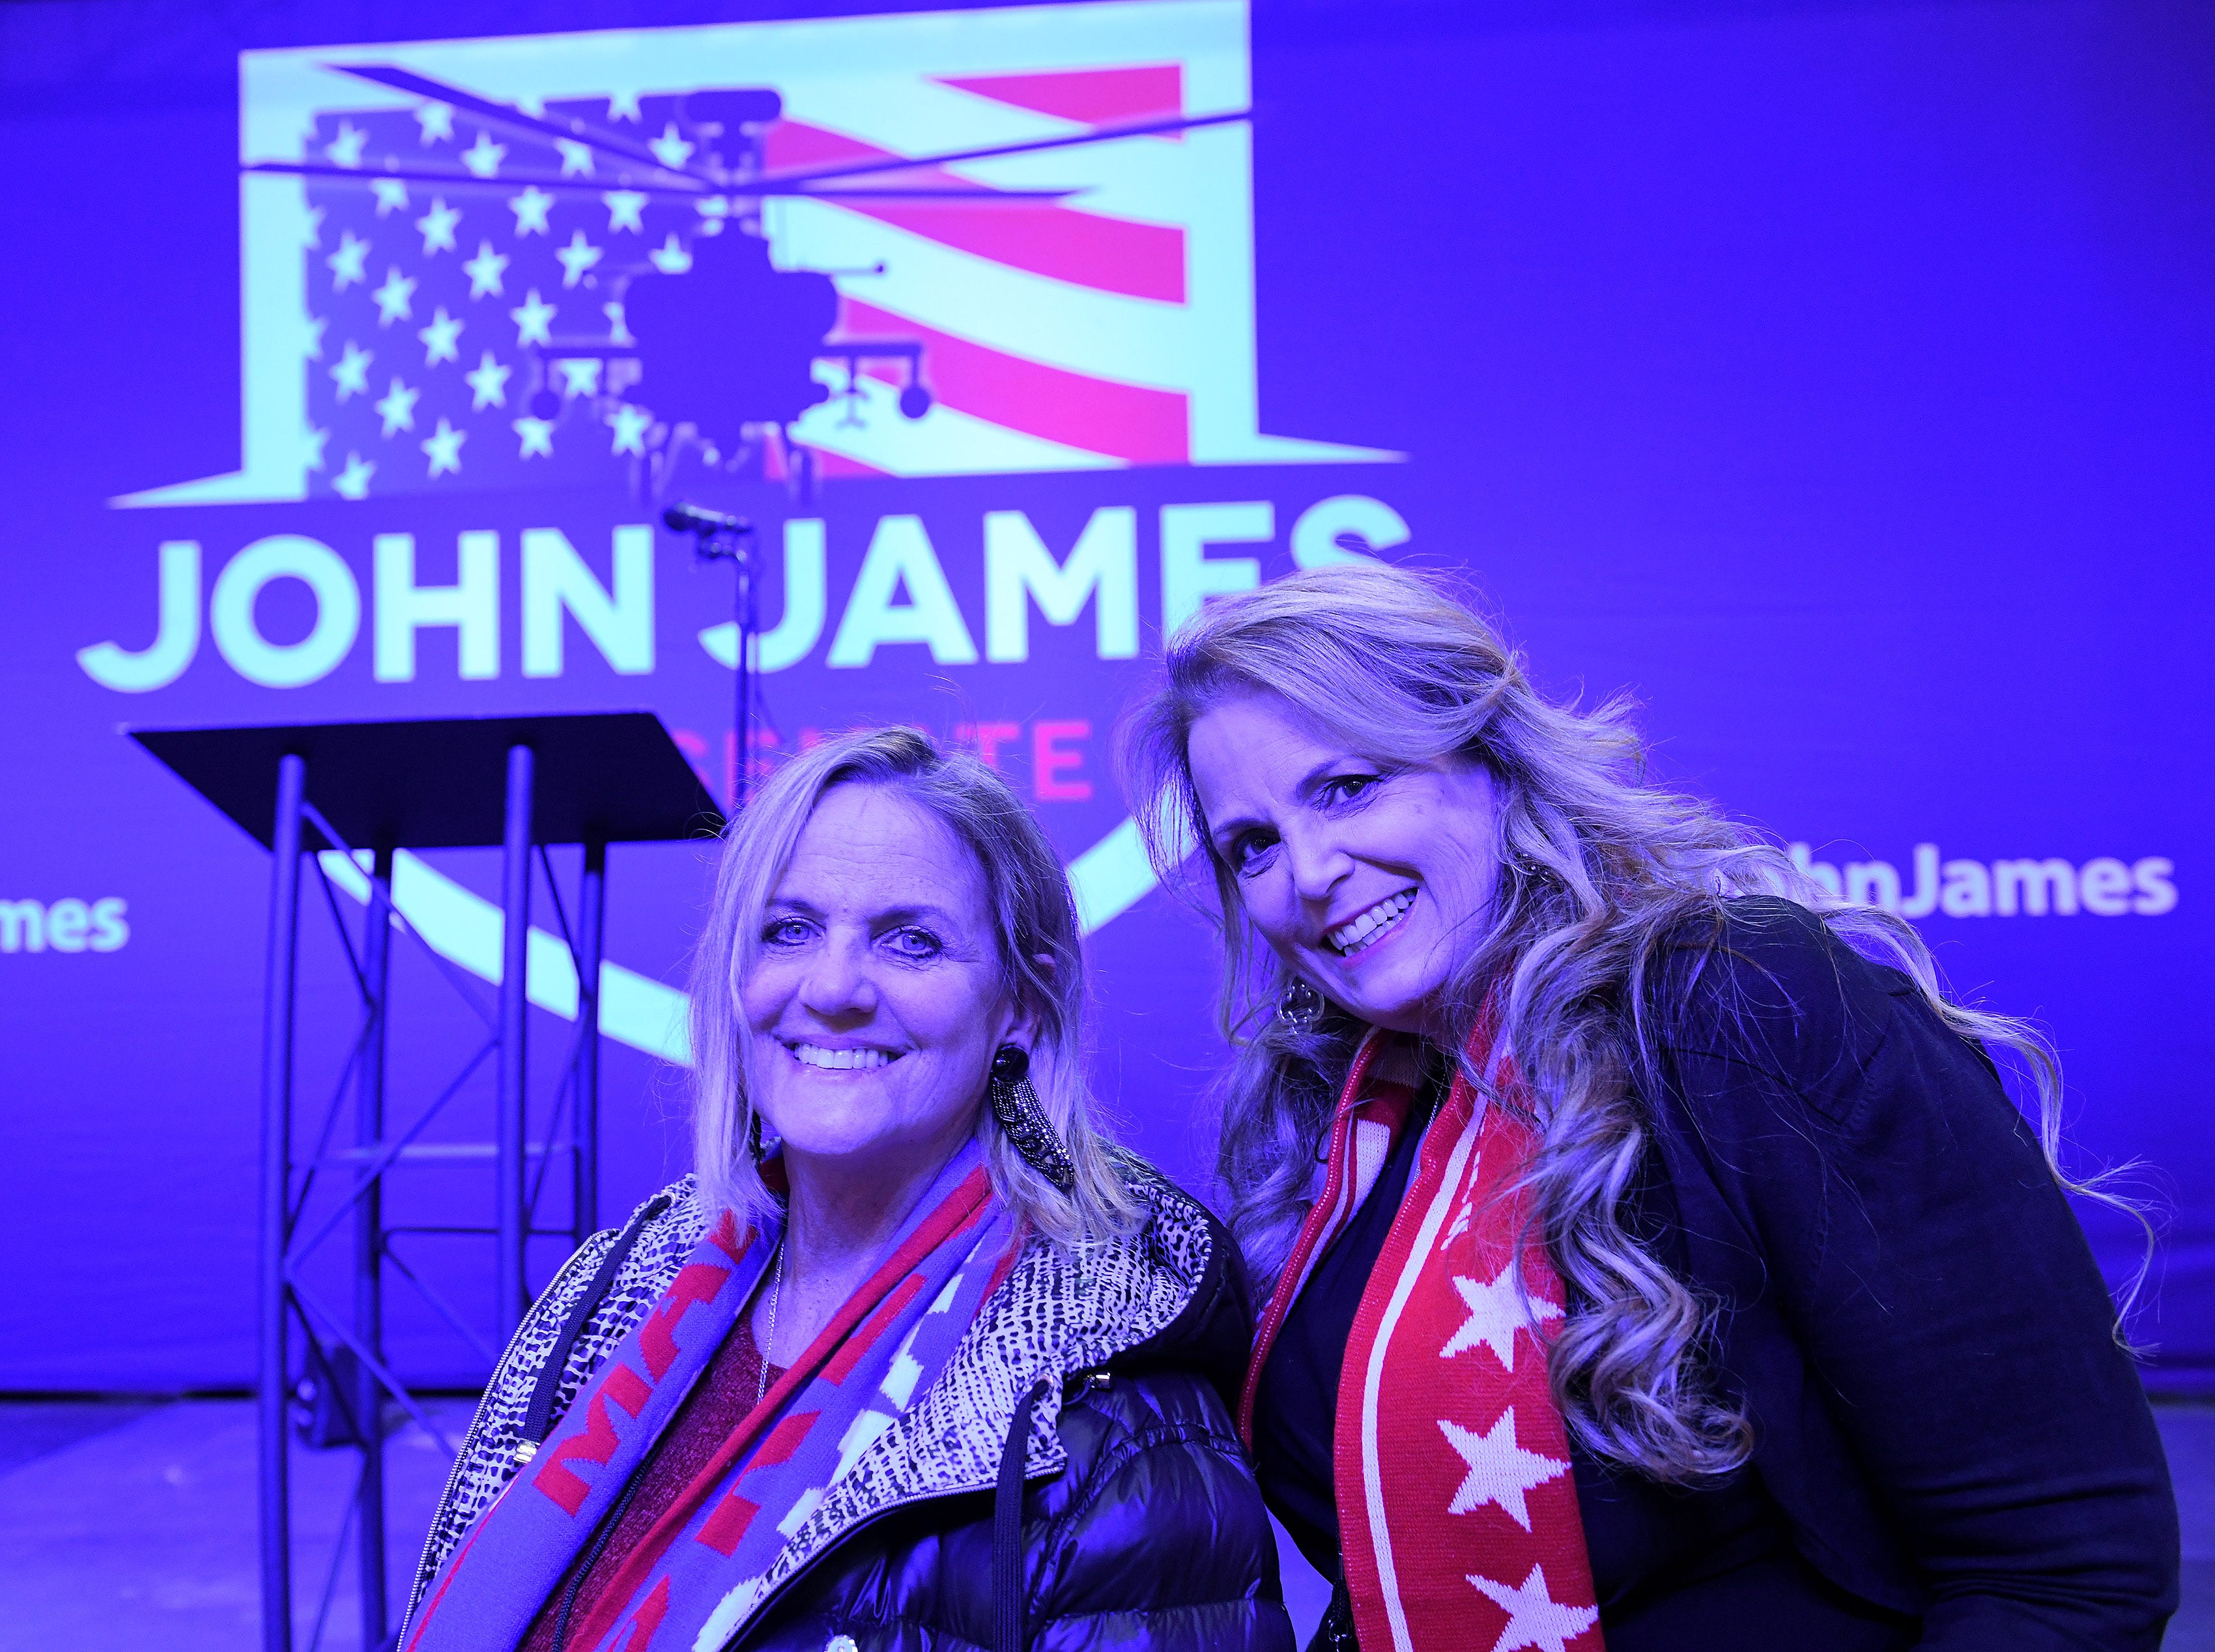 Deborah Richardson of Highland, left, and Vikki Parman of Commerce wait for results to come in at the election night party for U.S. Senate Republican candidate John James in Detroit.